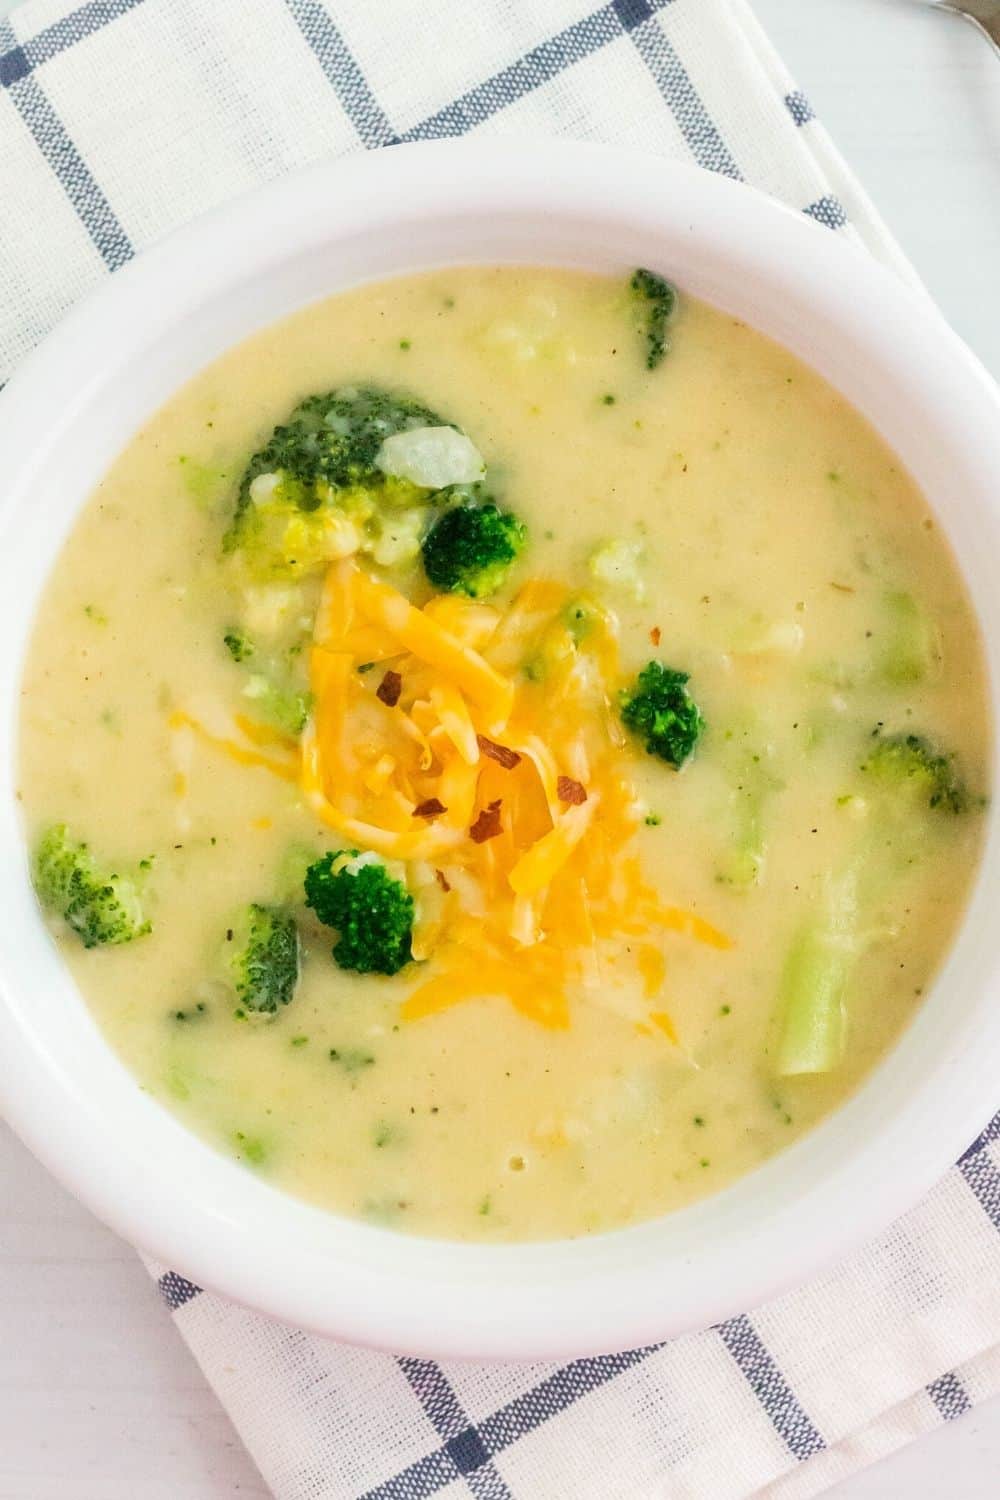 overhead view of a white bowl serving Instant Pot broccoli and potato soup, garnished with shredded cheese